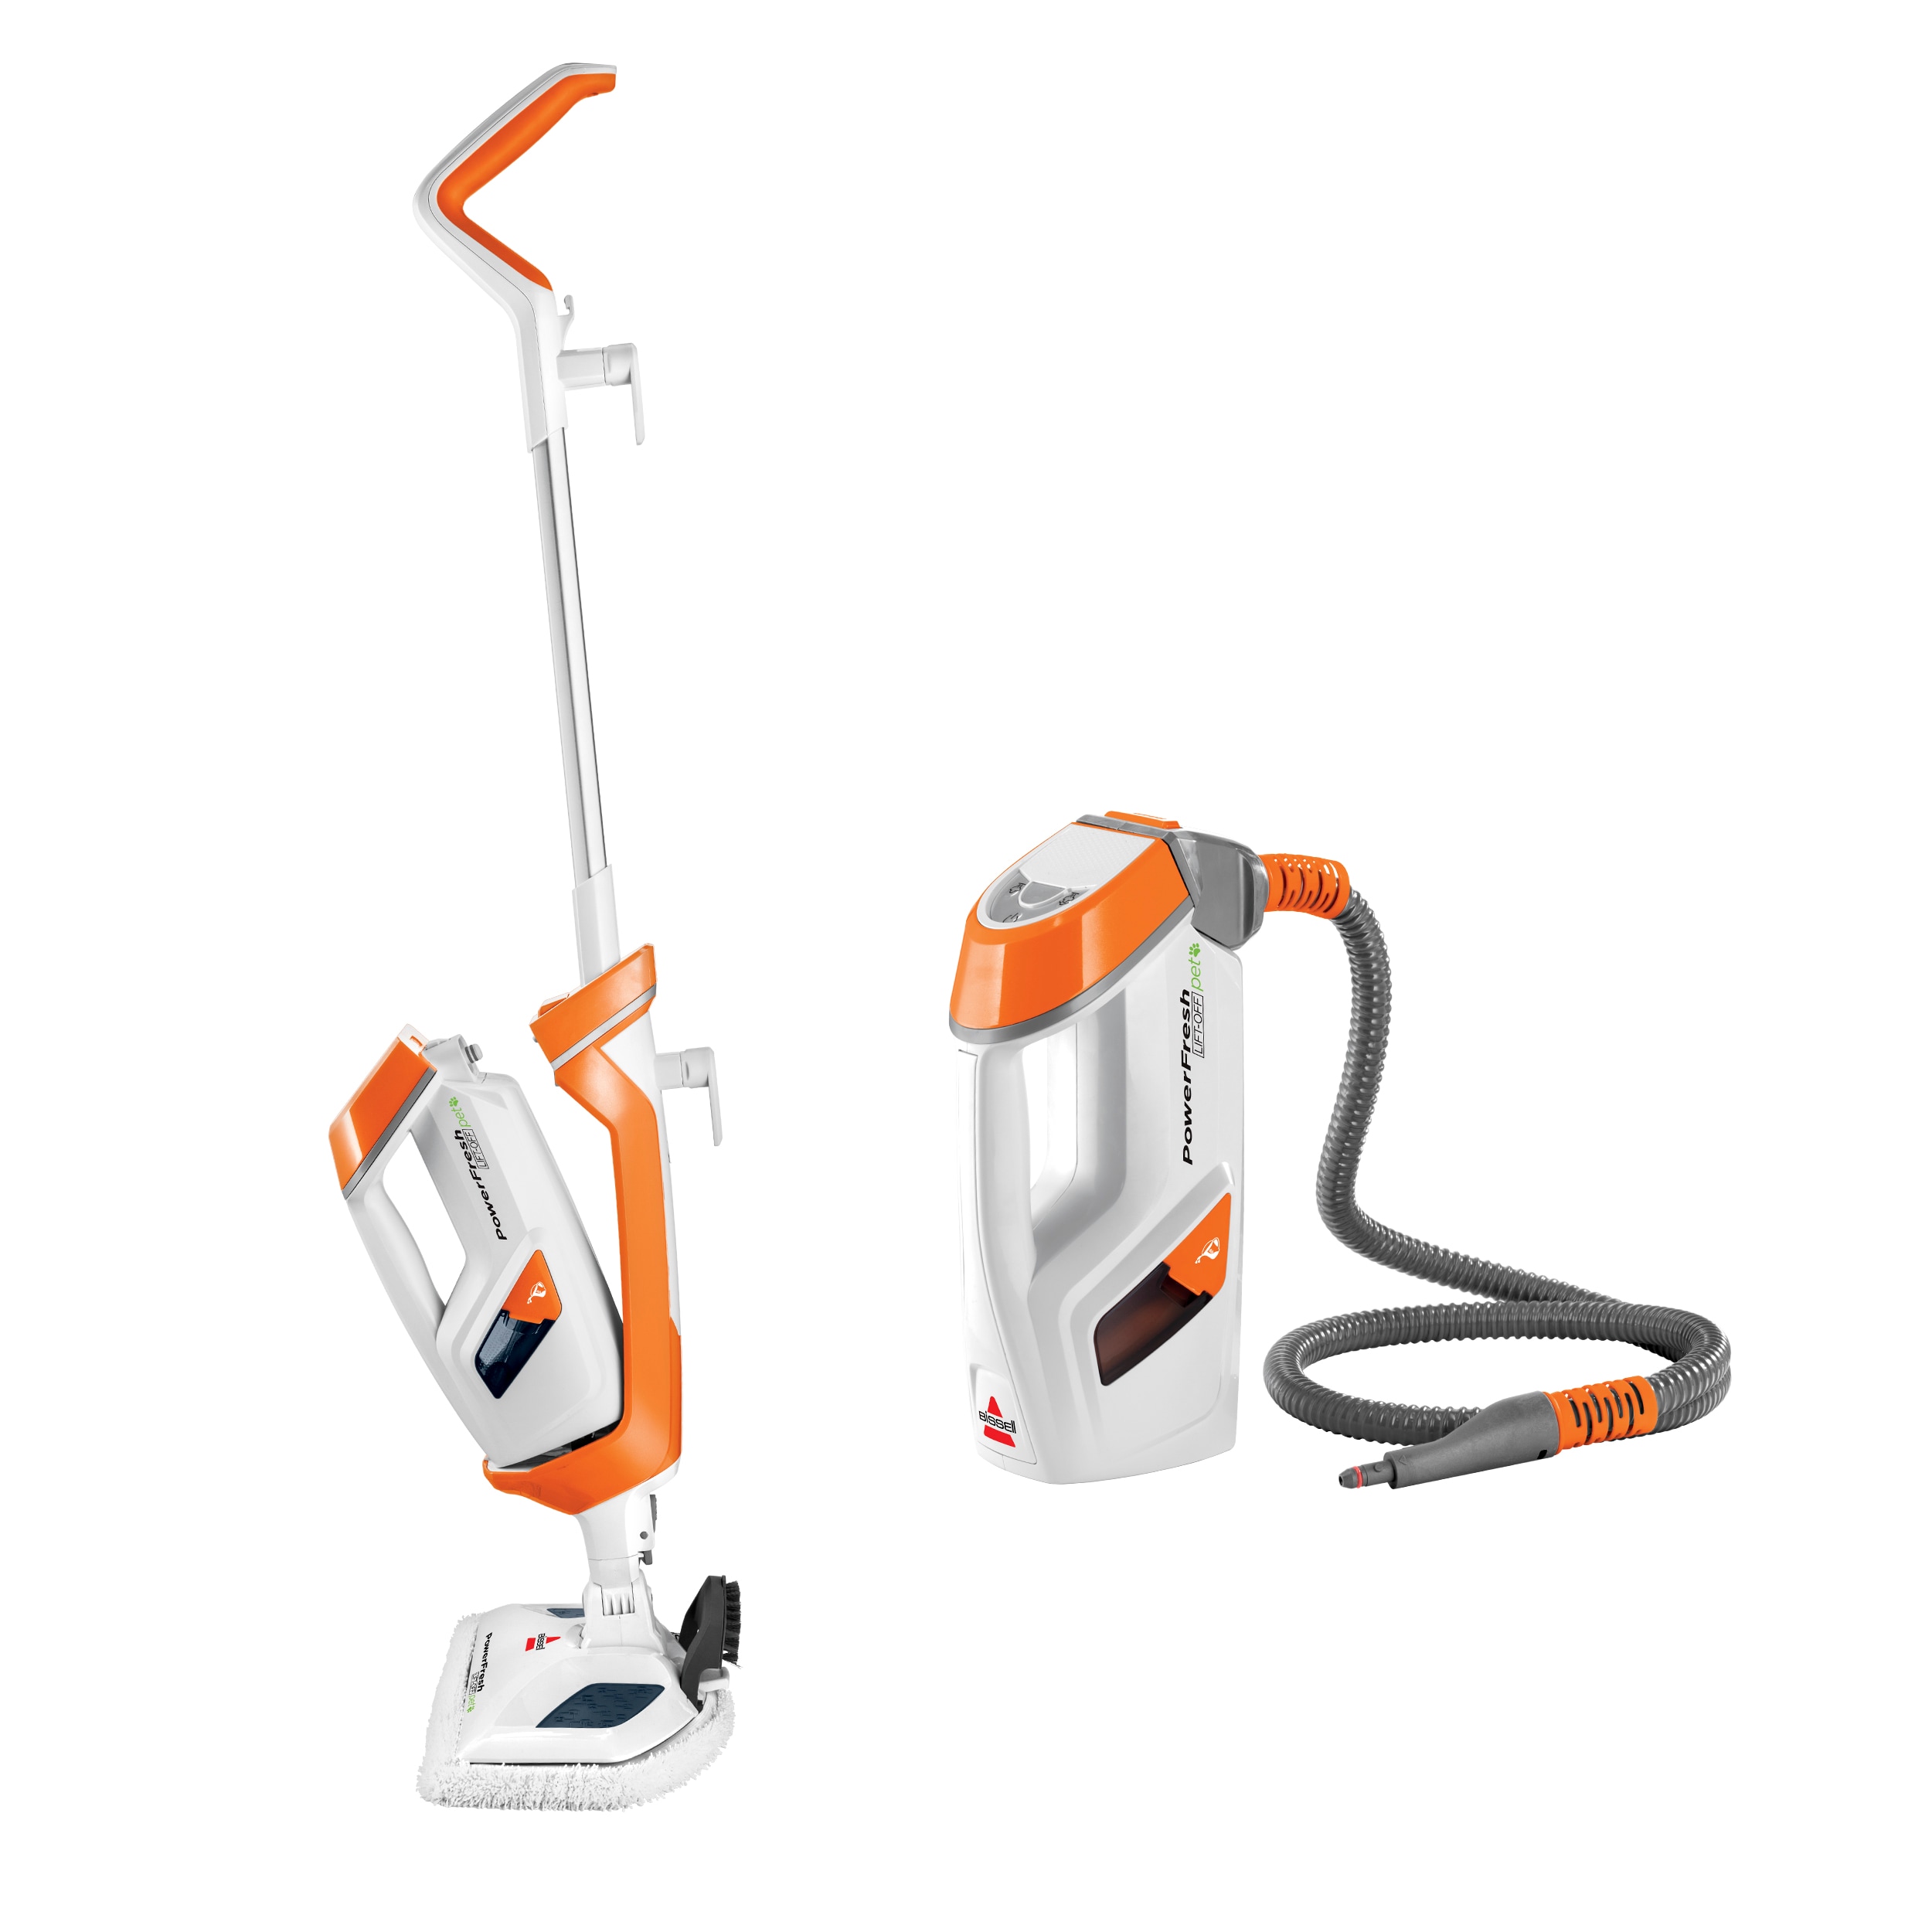 The Dupray SteamMop™ is perfect to clean floors, walls, and ceilings. 